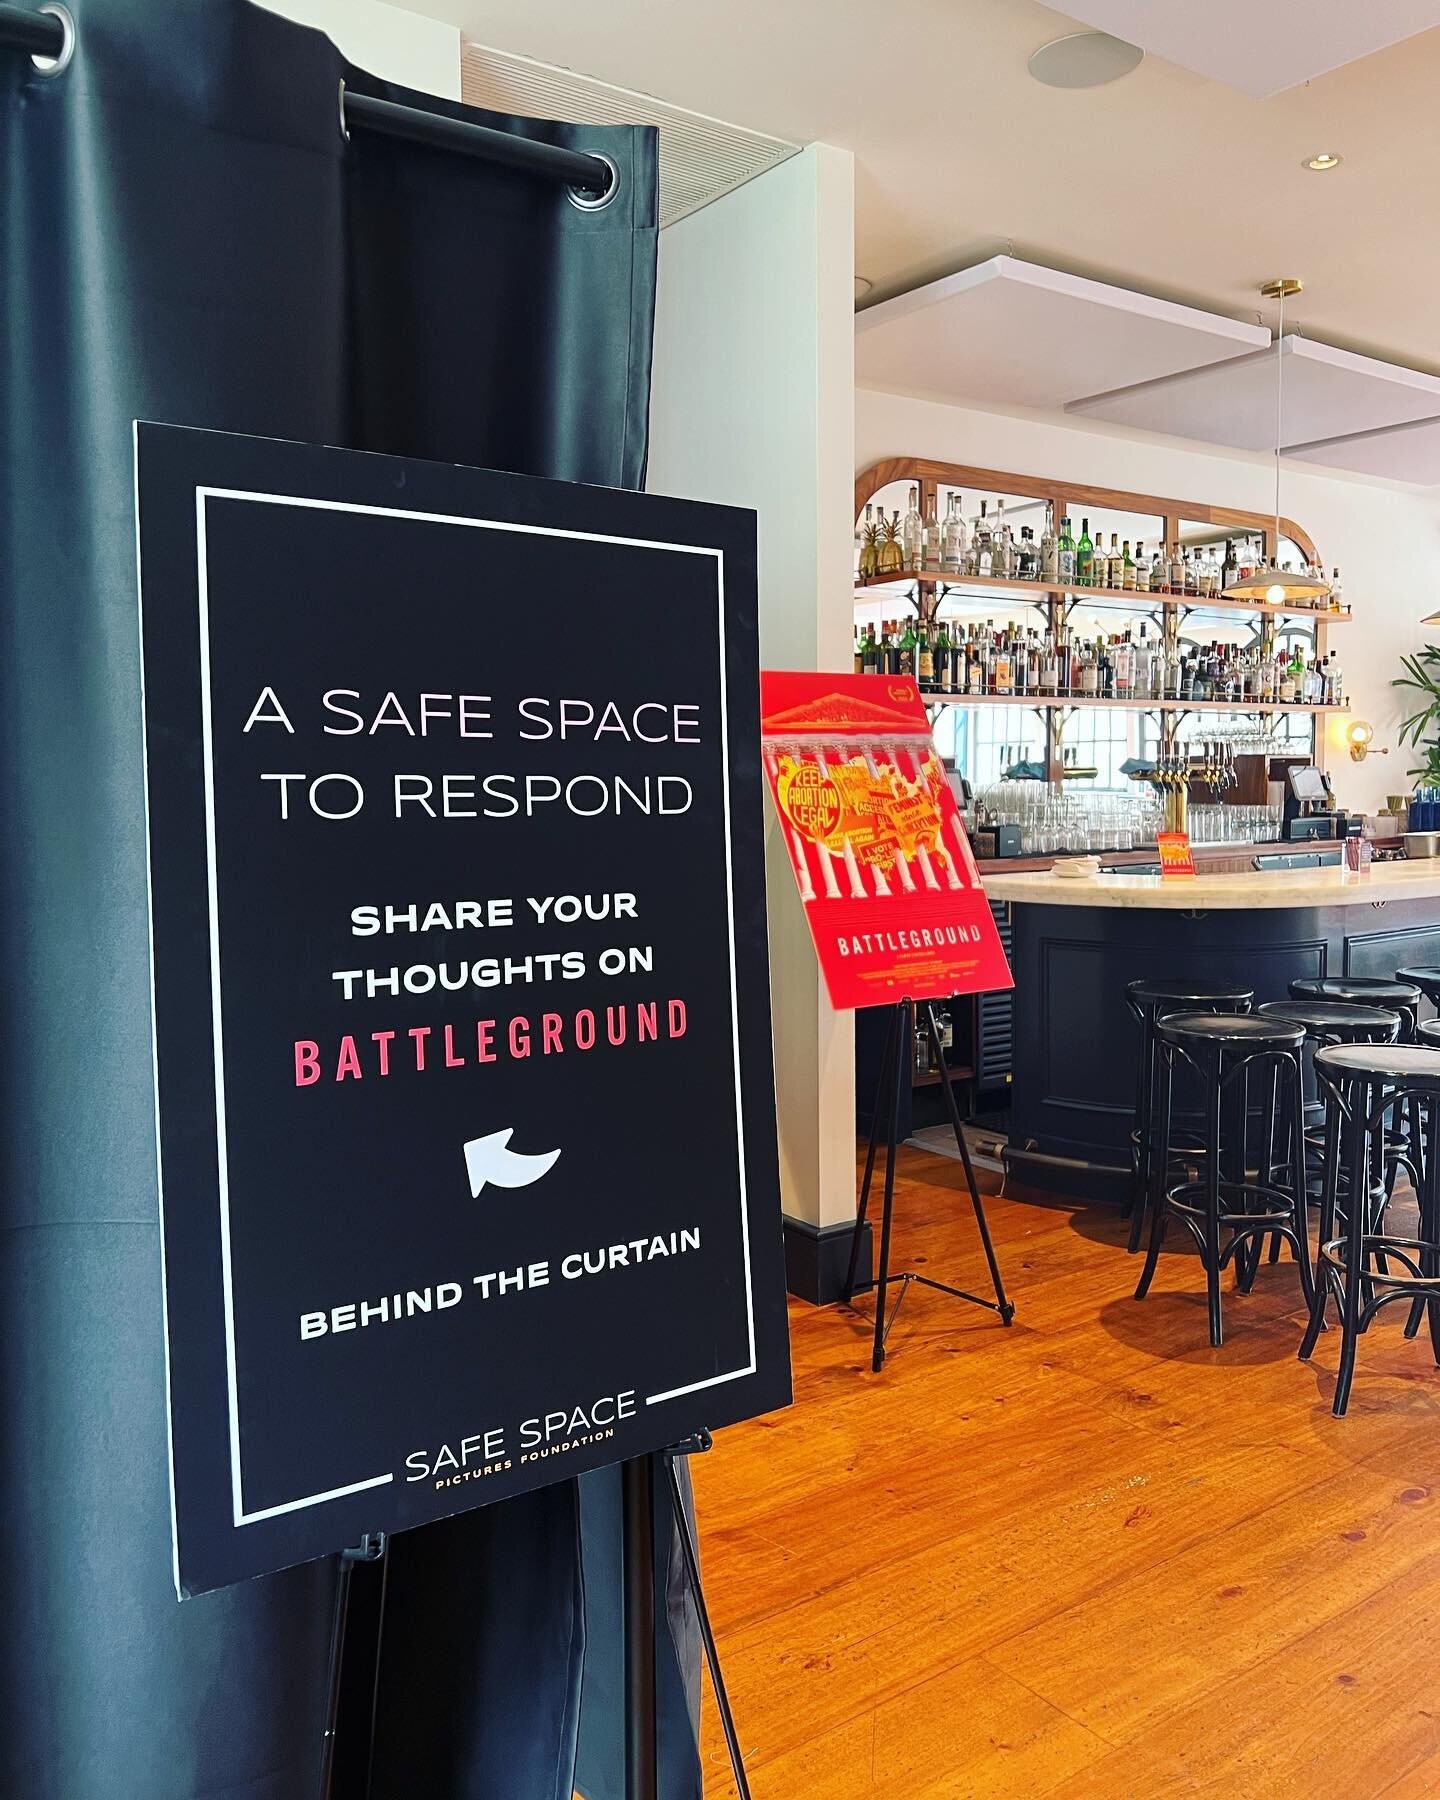 Battleground world premiere screening followed by an evening of cocktails and conversation with #SafeSpacePictures 🎥 

@safespace.pictures 

Venue: @junglebirdnyc